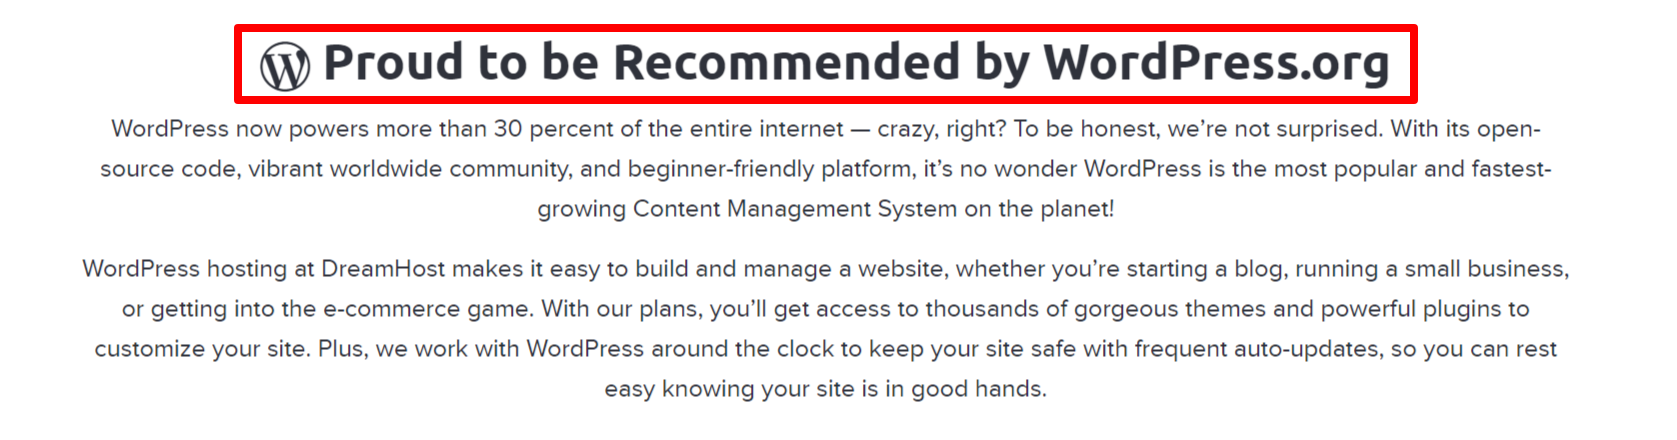 Recommended by WordPress.org